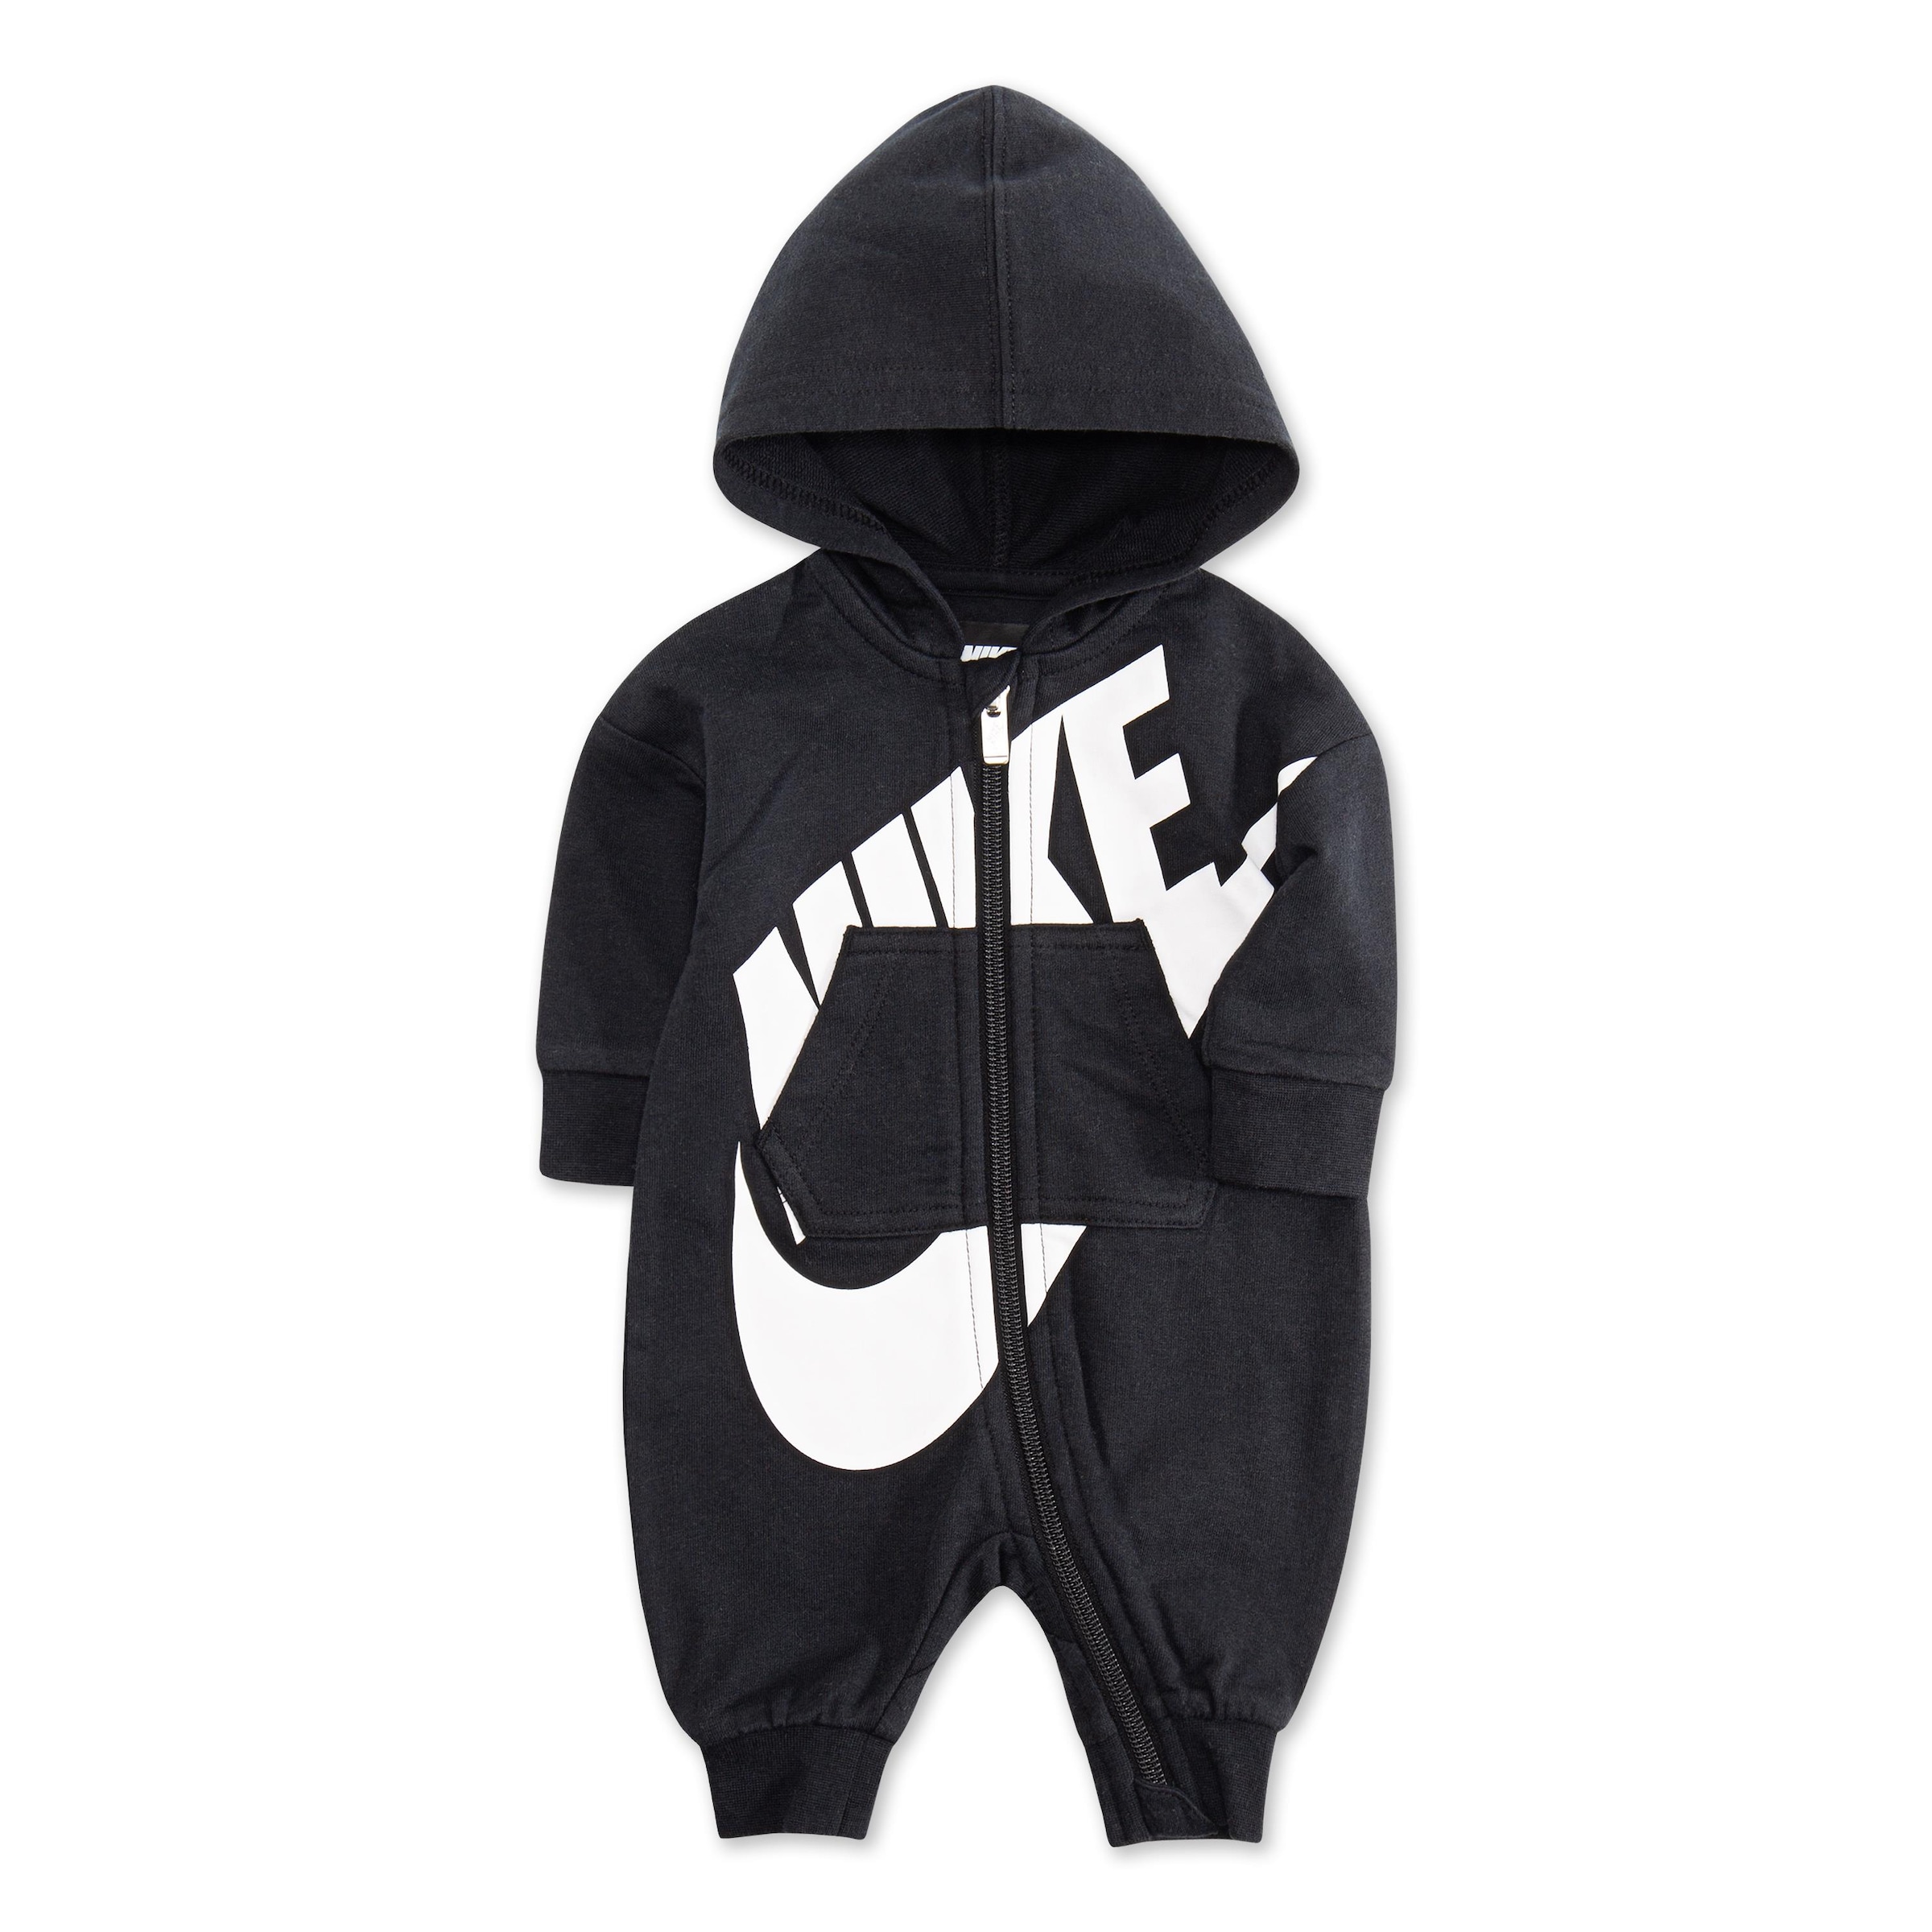 Nike Sportswear bei Jumpsuit COVERALL« DAY online »NKN PLAY ALL OTTO